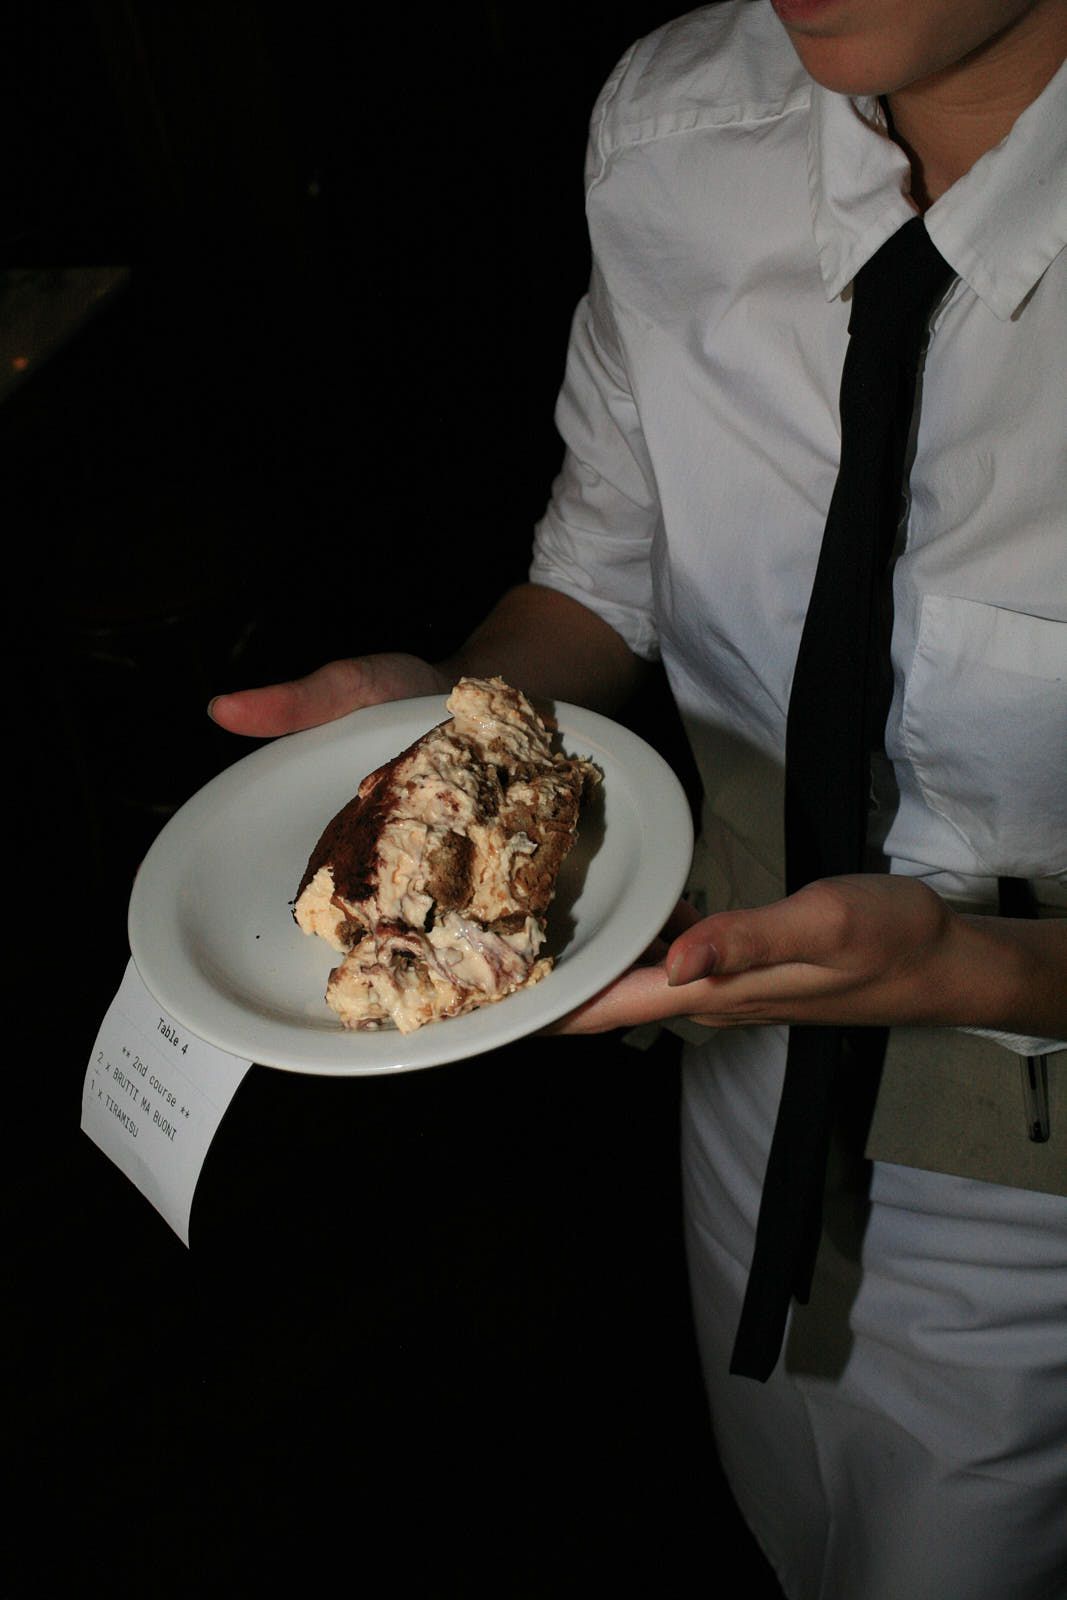 A plate of tiramisù is ferried to a table.